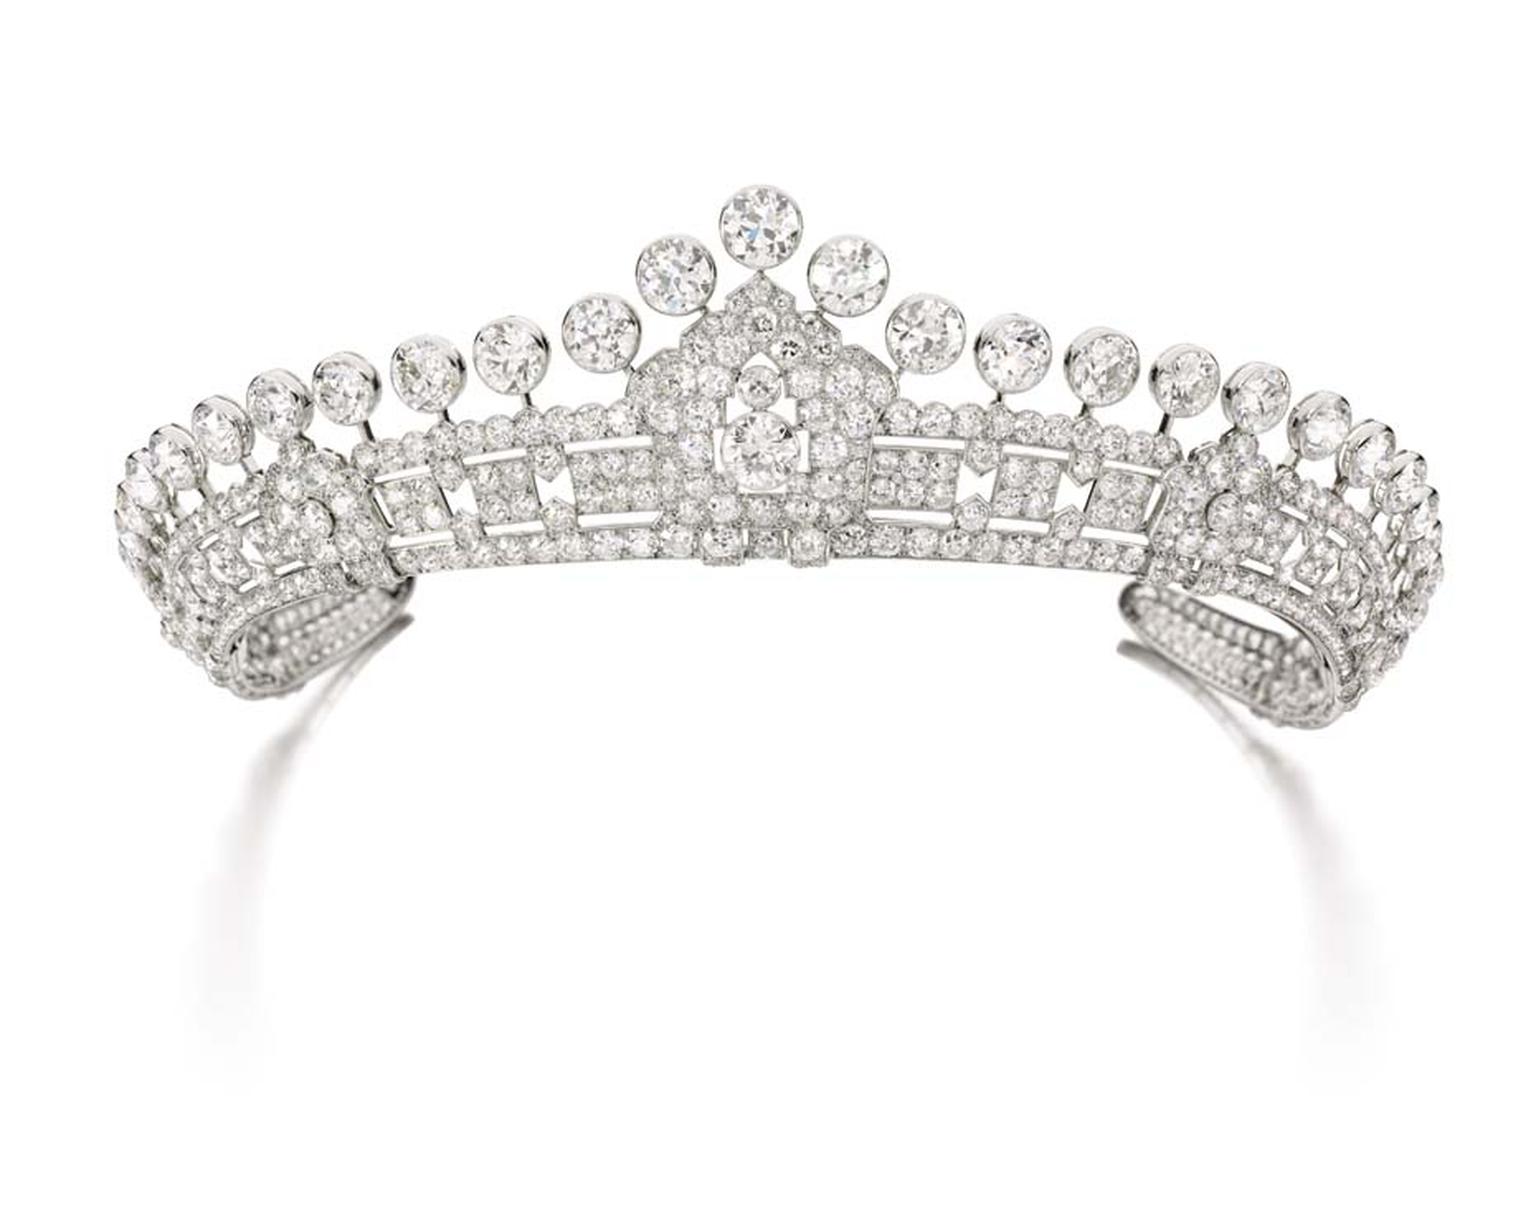 A 1930s’ Cartier diamond tiara is one of three vintage-style tiaras from the estate of Mary, Duchess of Roxburghe, set to go under the hammer at next month’s Magnificent Jewels and Noble Jewels Sale at Sotheby’s Geneva.